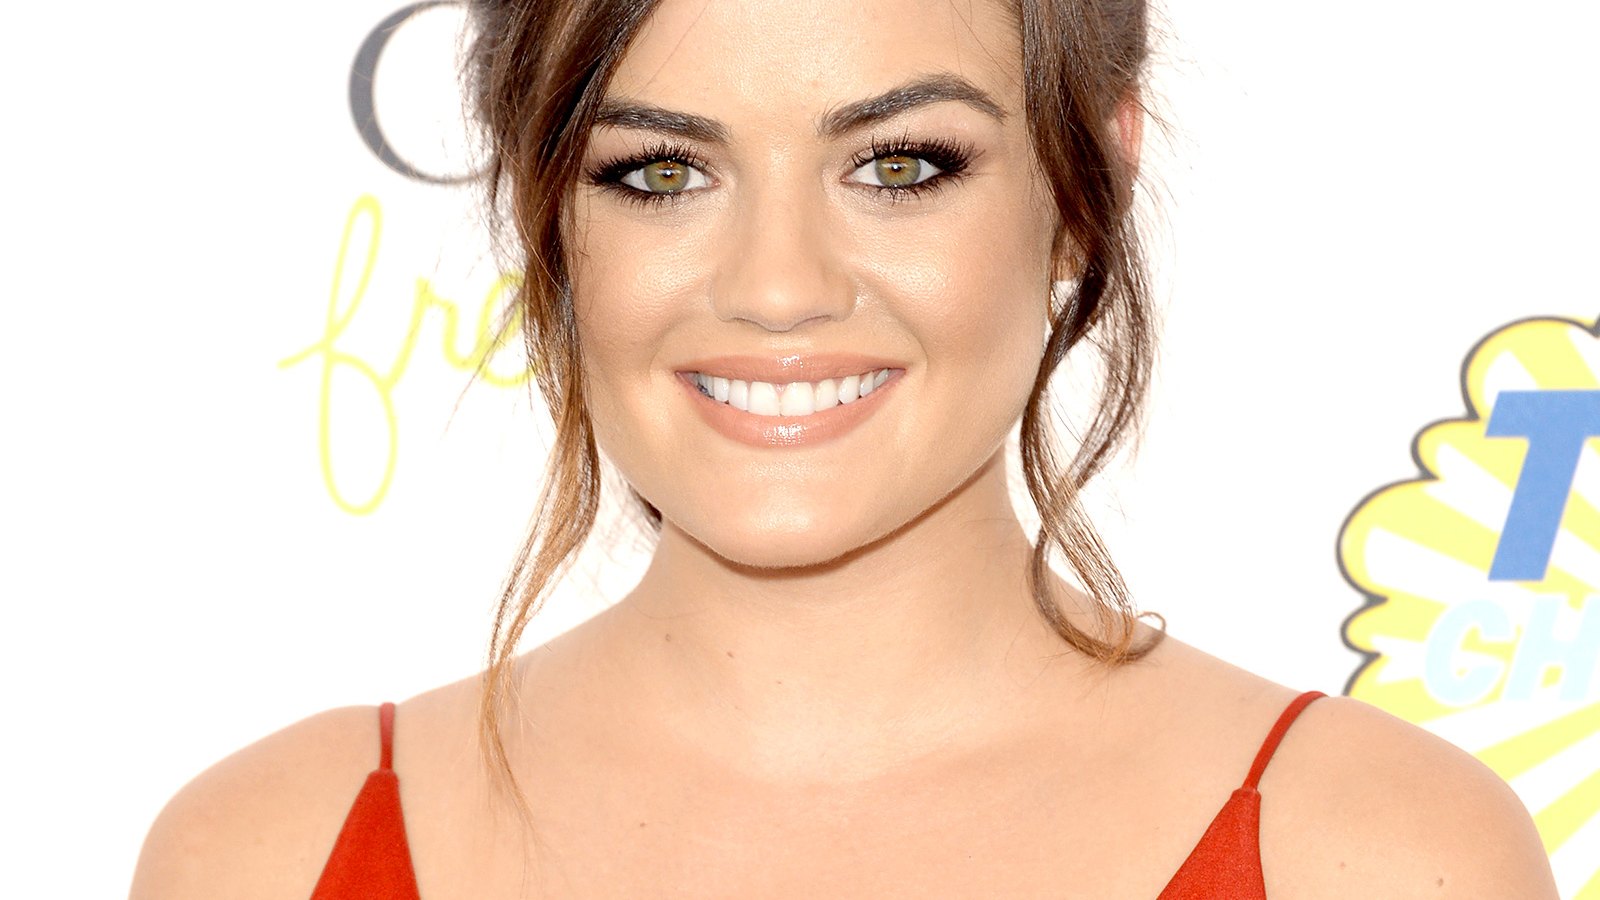 Lucy Hale at the 2014 Teen Choice Awards on Aug. 10.